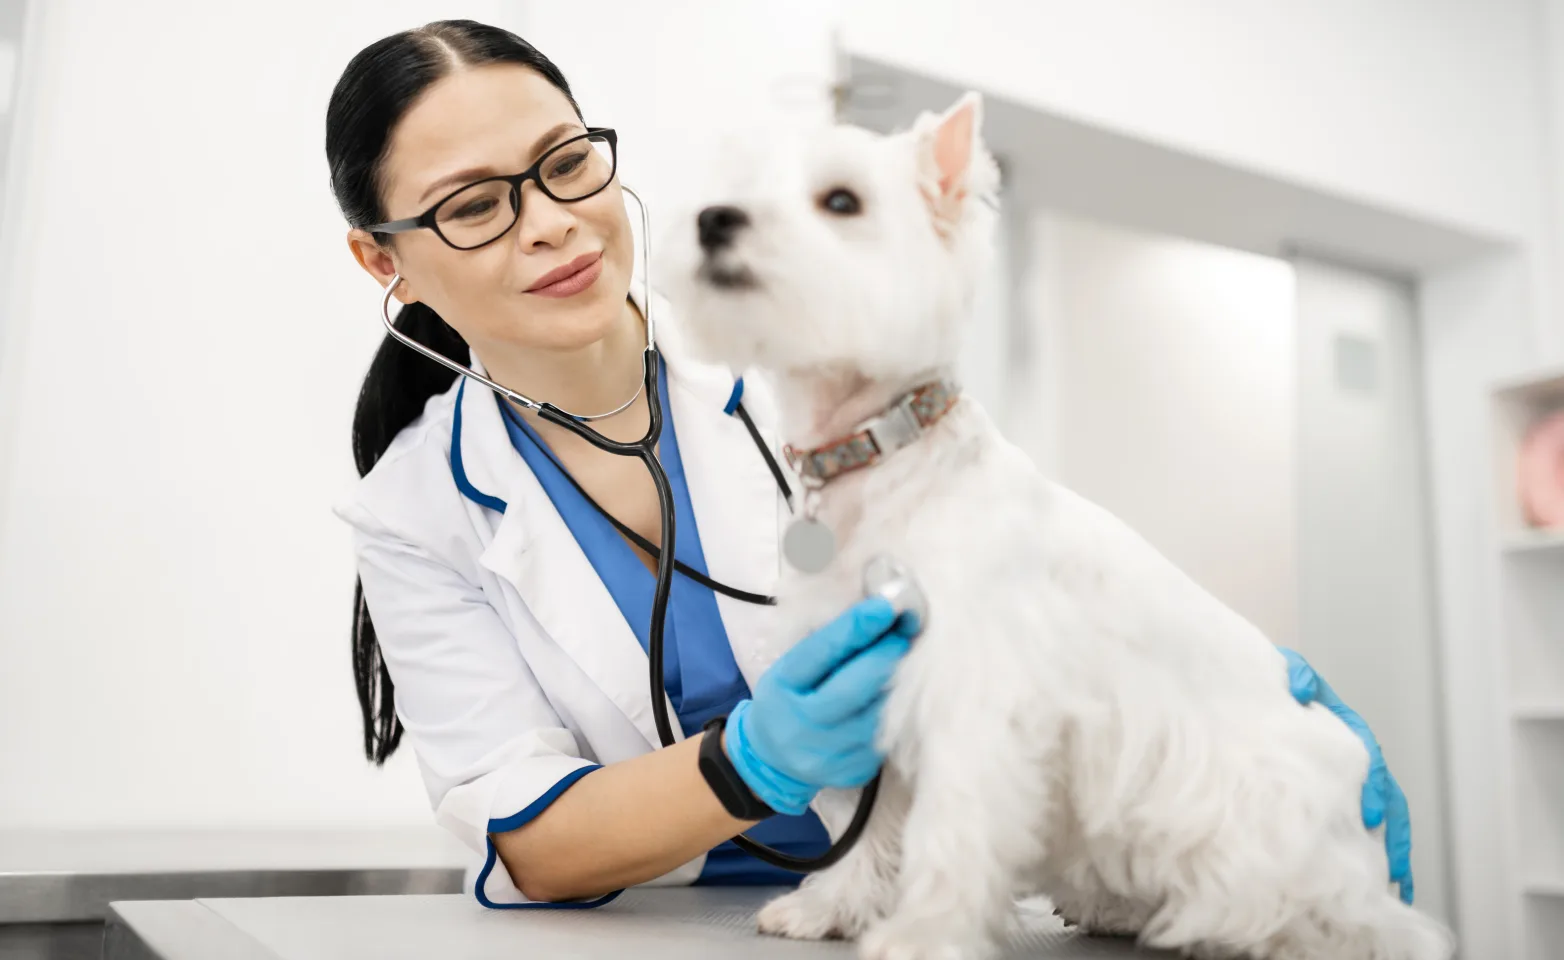 Woman Checking Dog with Stethoscope 